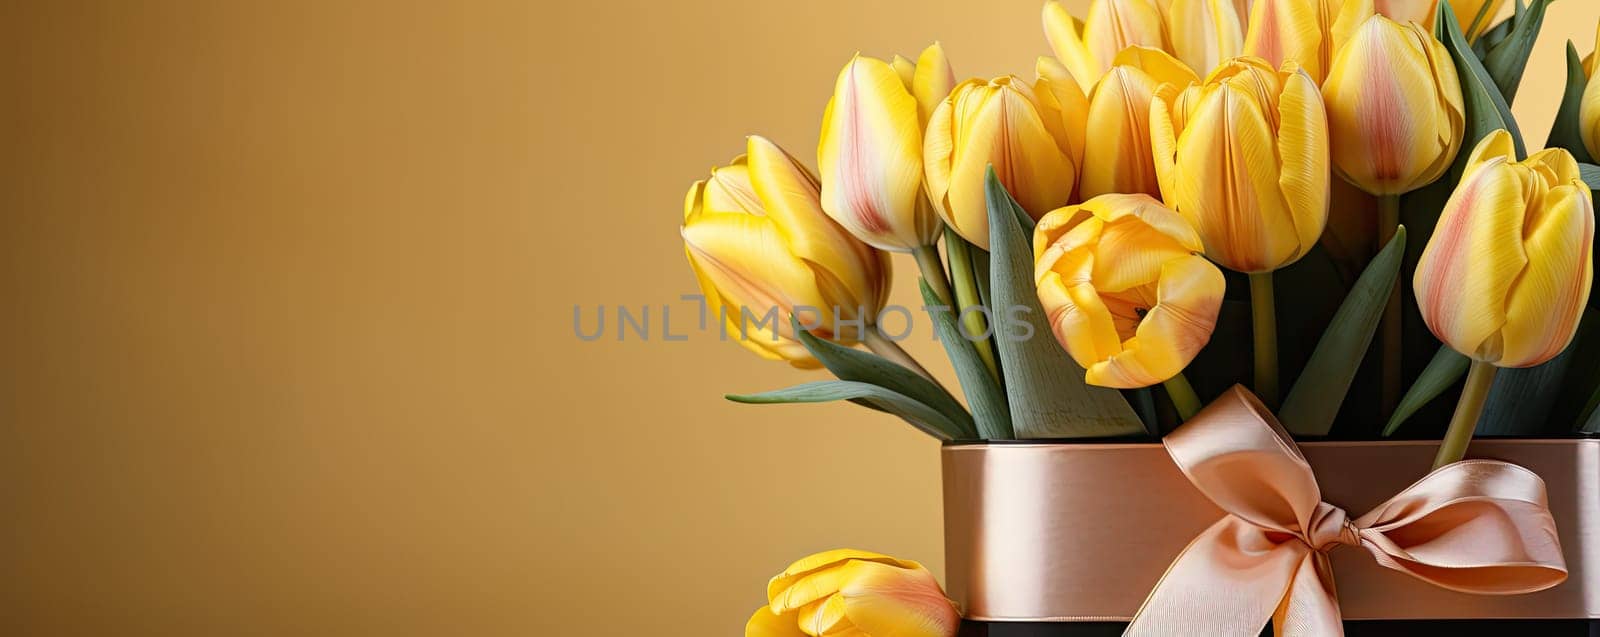 Bright and colorful banner with a bouquet of spring tulips on a cheerful yellow background. Perfect for seasonal greetings and celebrations. by Yurich32